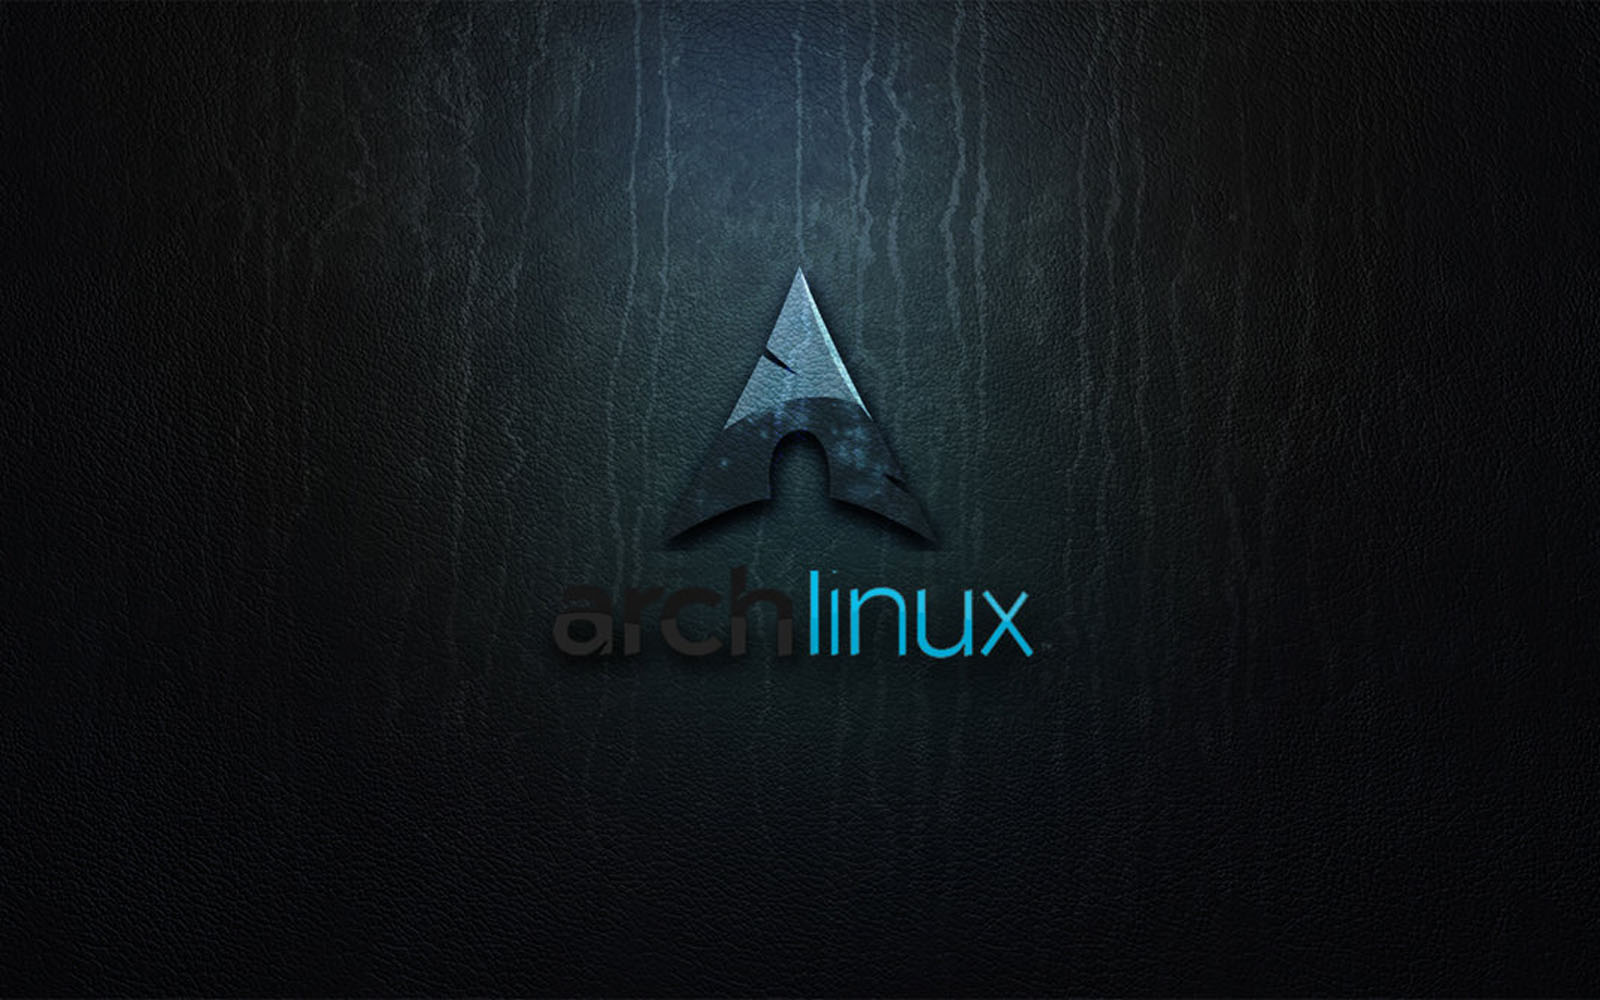 Tag Arch Linux Wallpaper Background Photos Image Andpictures